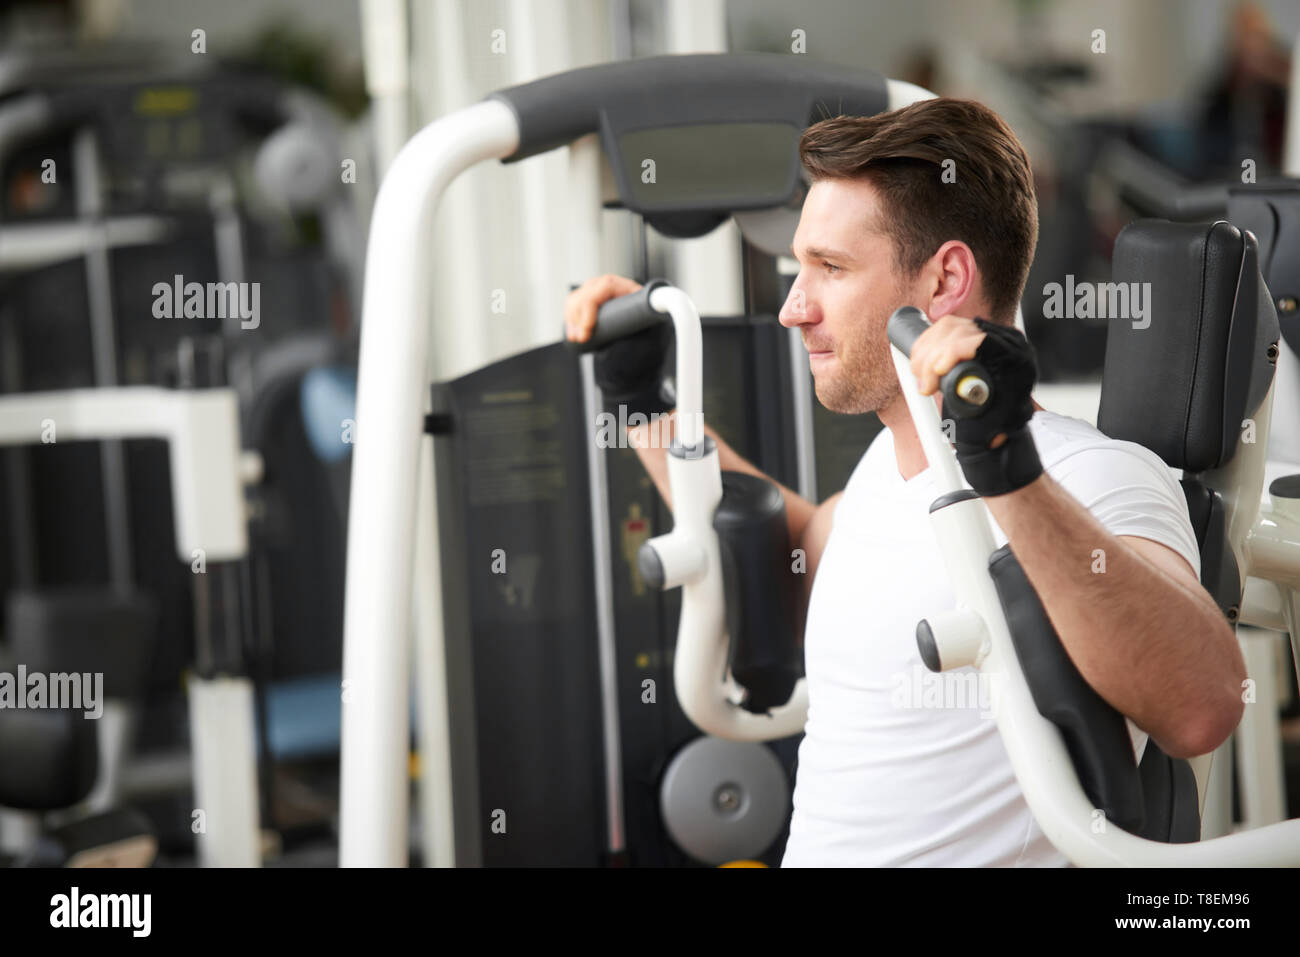 Young athletic man working out in gym. Fitness athlete doing chest exercises on press machine. People, sport, active livestyle. Stock Photo